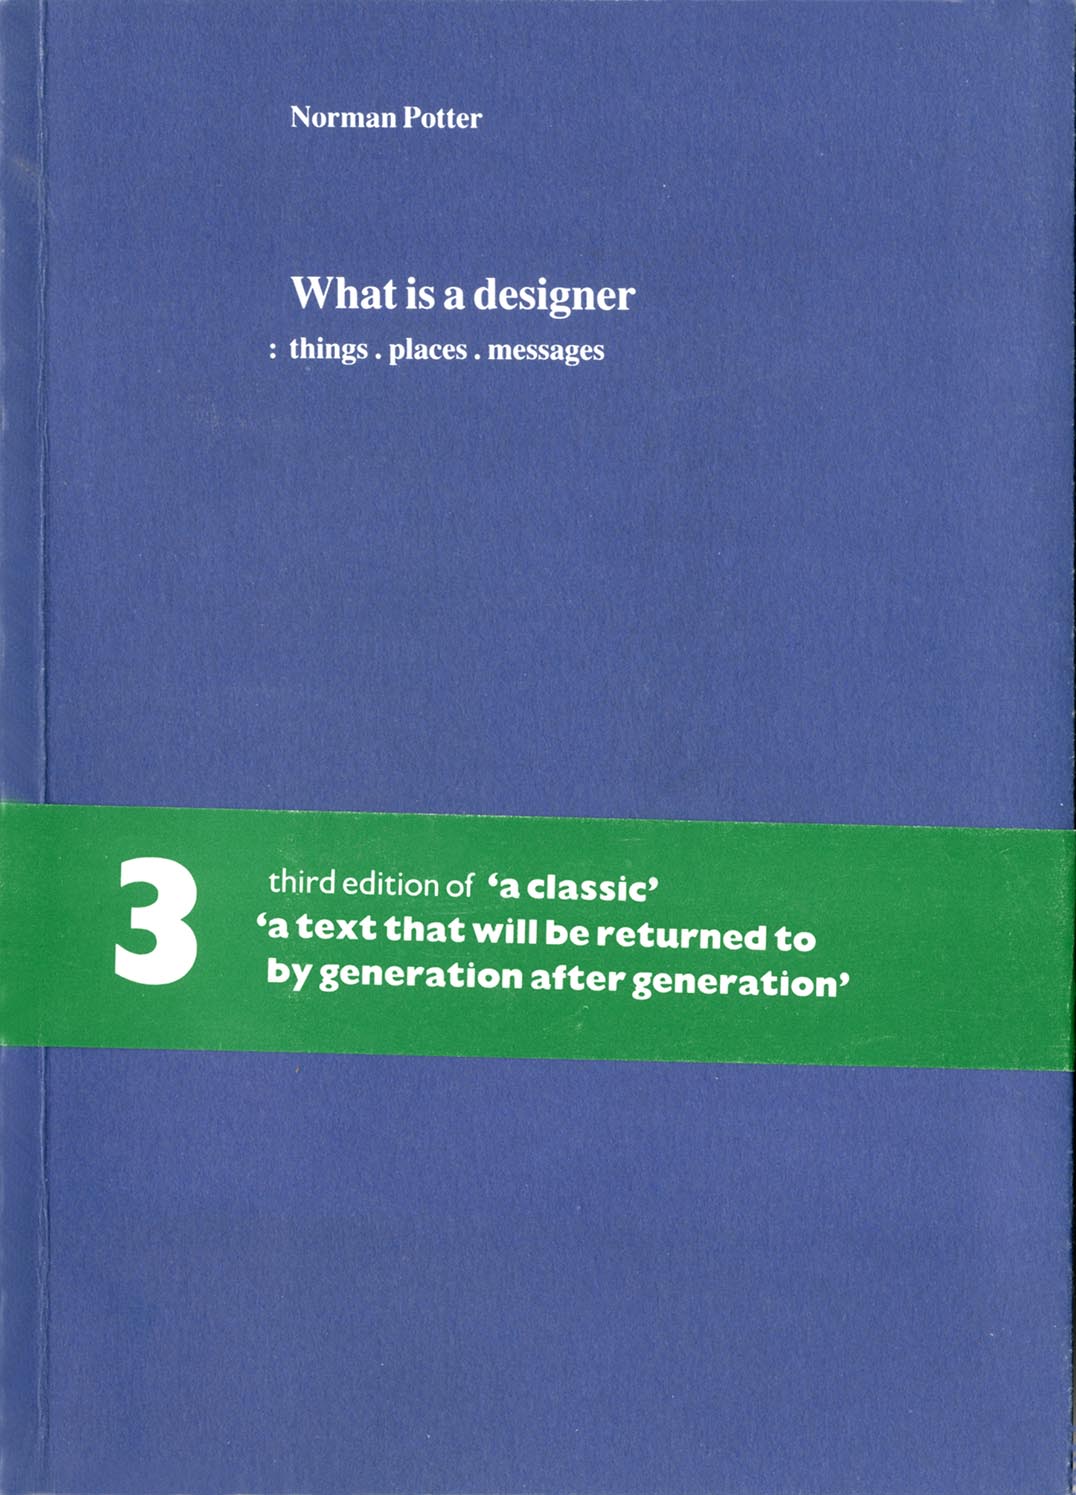 ‘What is a designer’ out of print